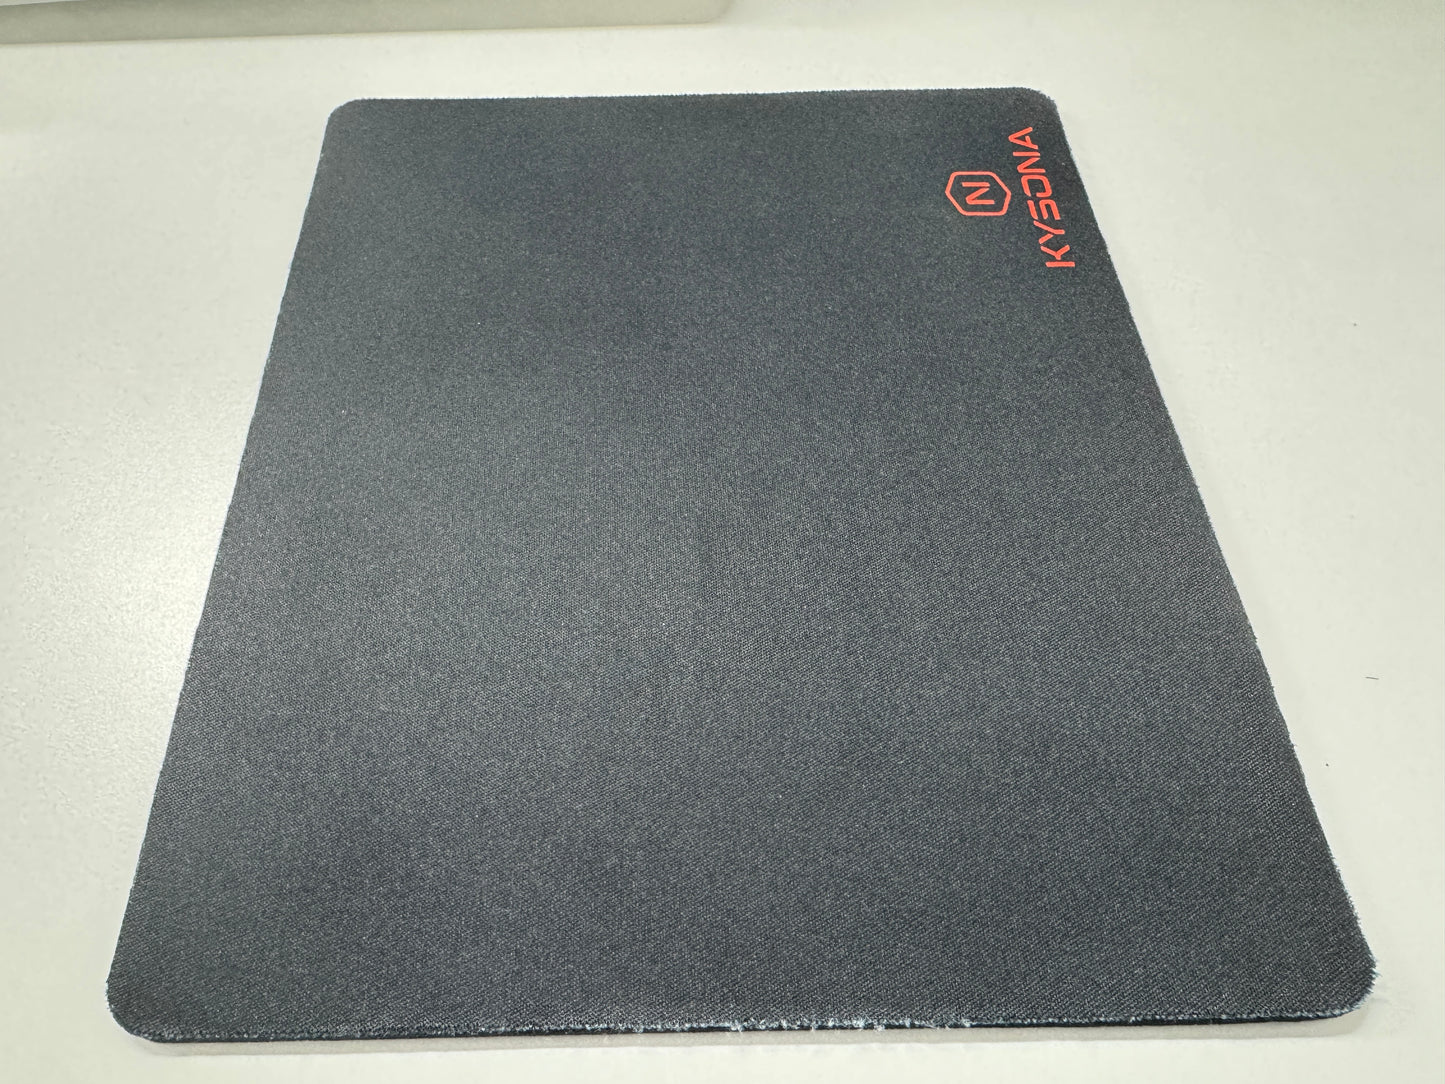 High-Quality Mouse Pad: Smooth Surface with Anti-Slip Backing, Multiple Designs, Suitable for Office and Gaming